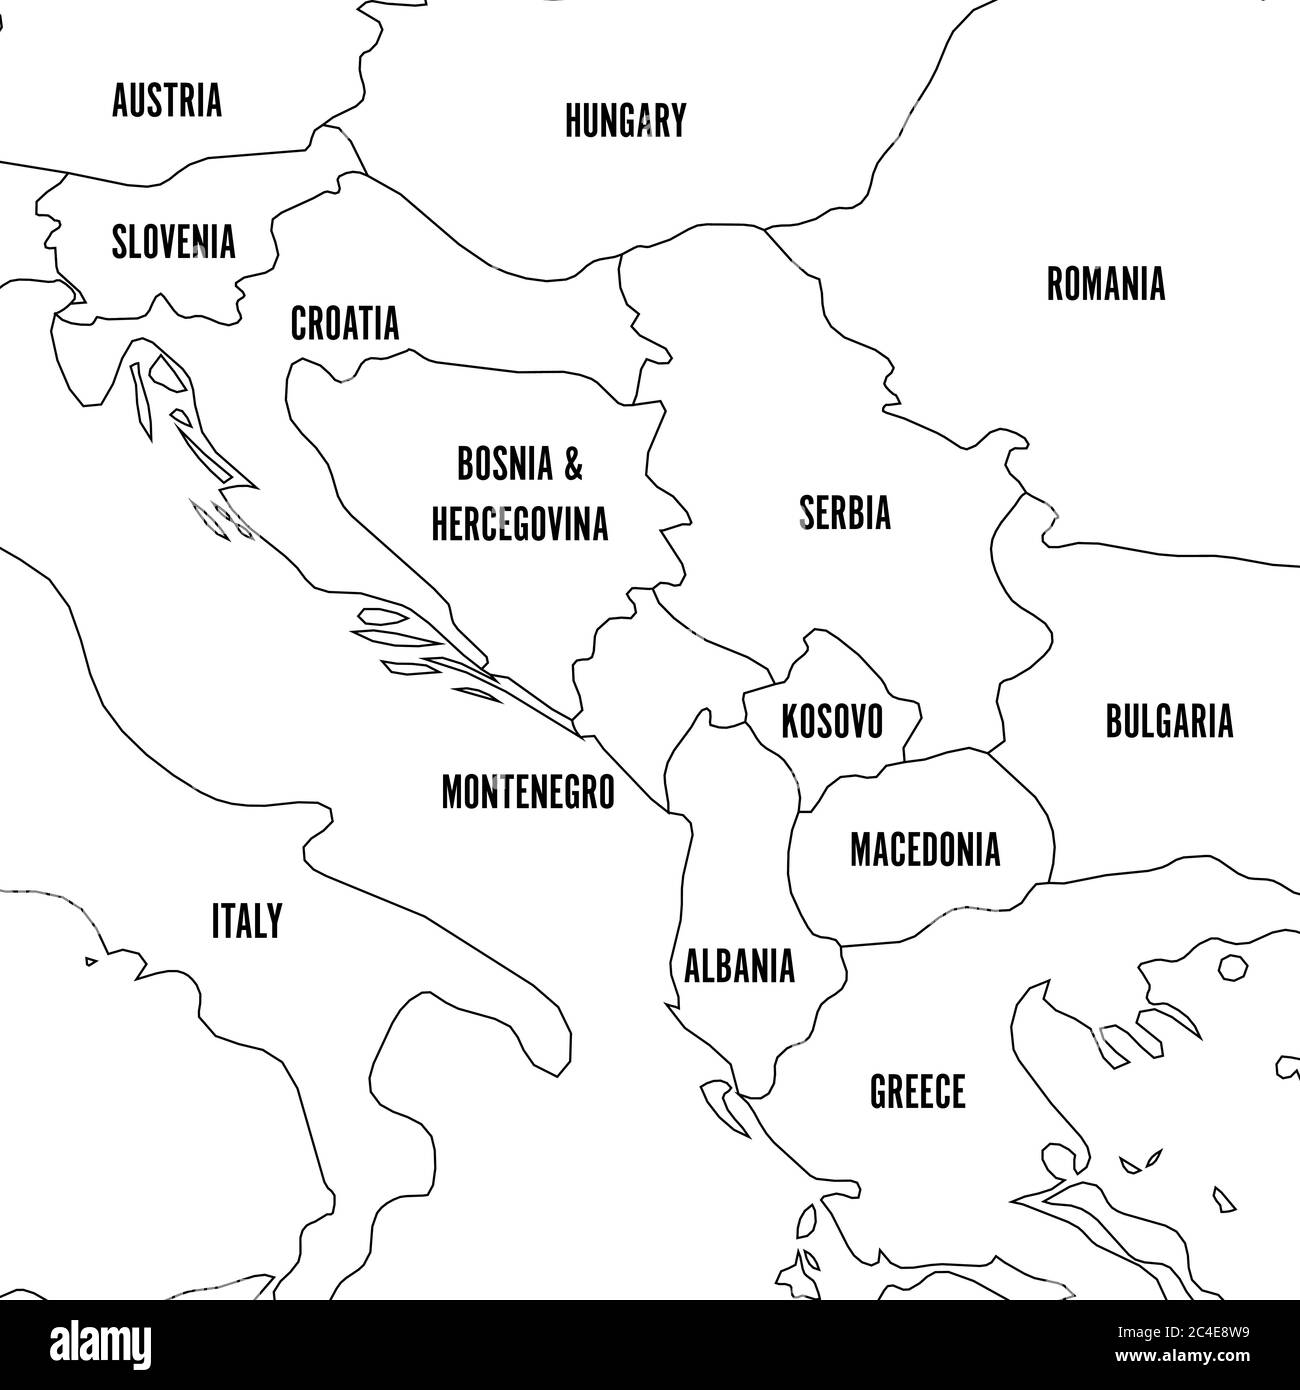 Political map of Balkans - States of Balkan Peninsula. Simple flat black outline with black country name labels. Stock Vector